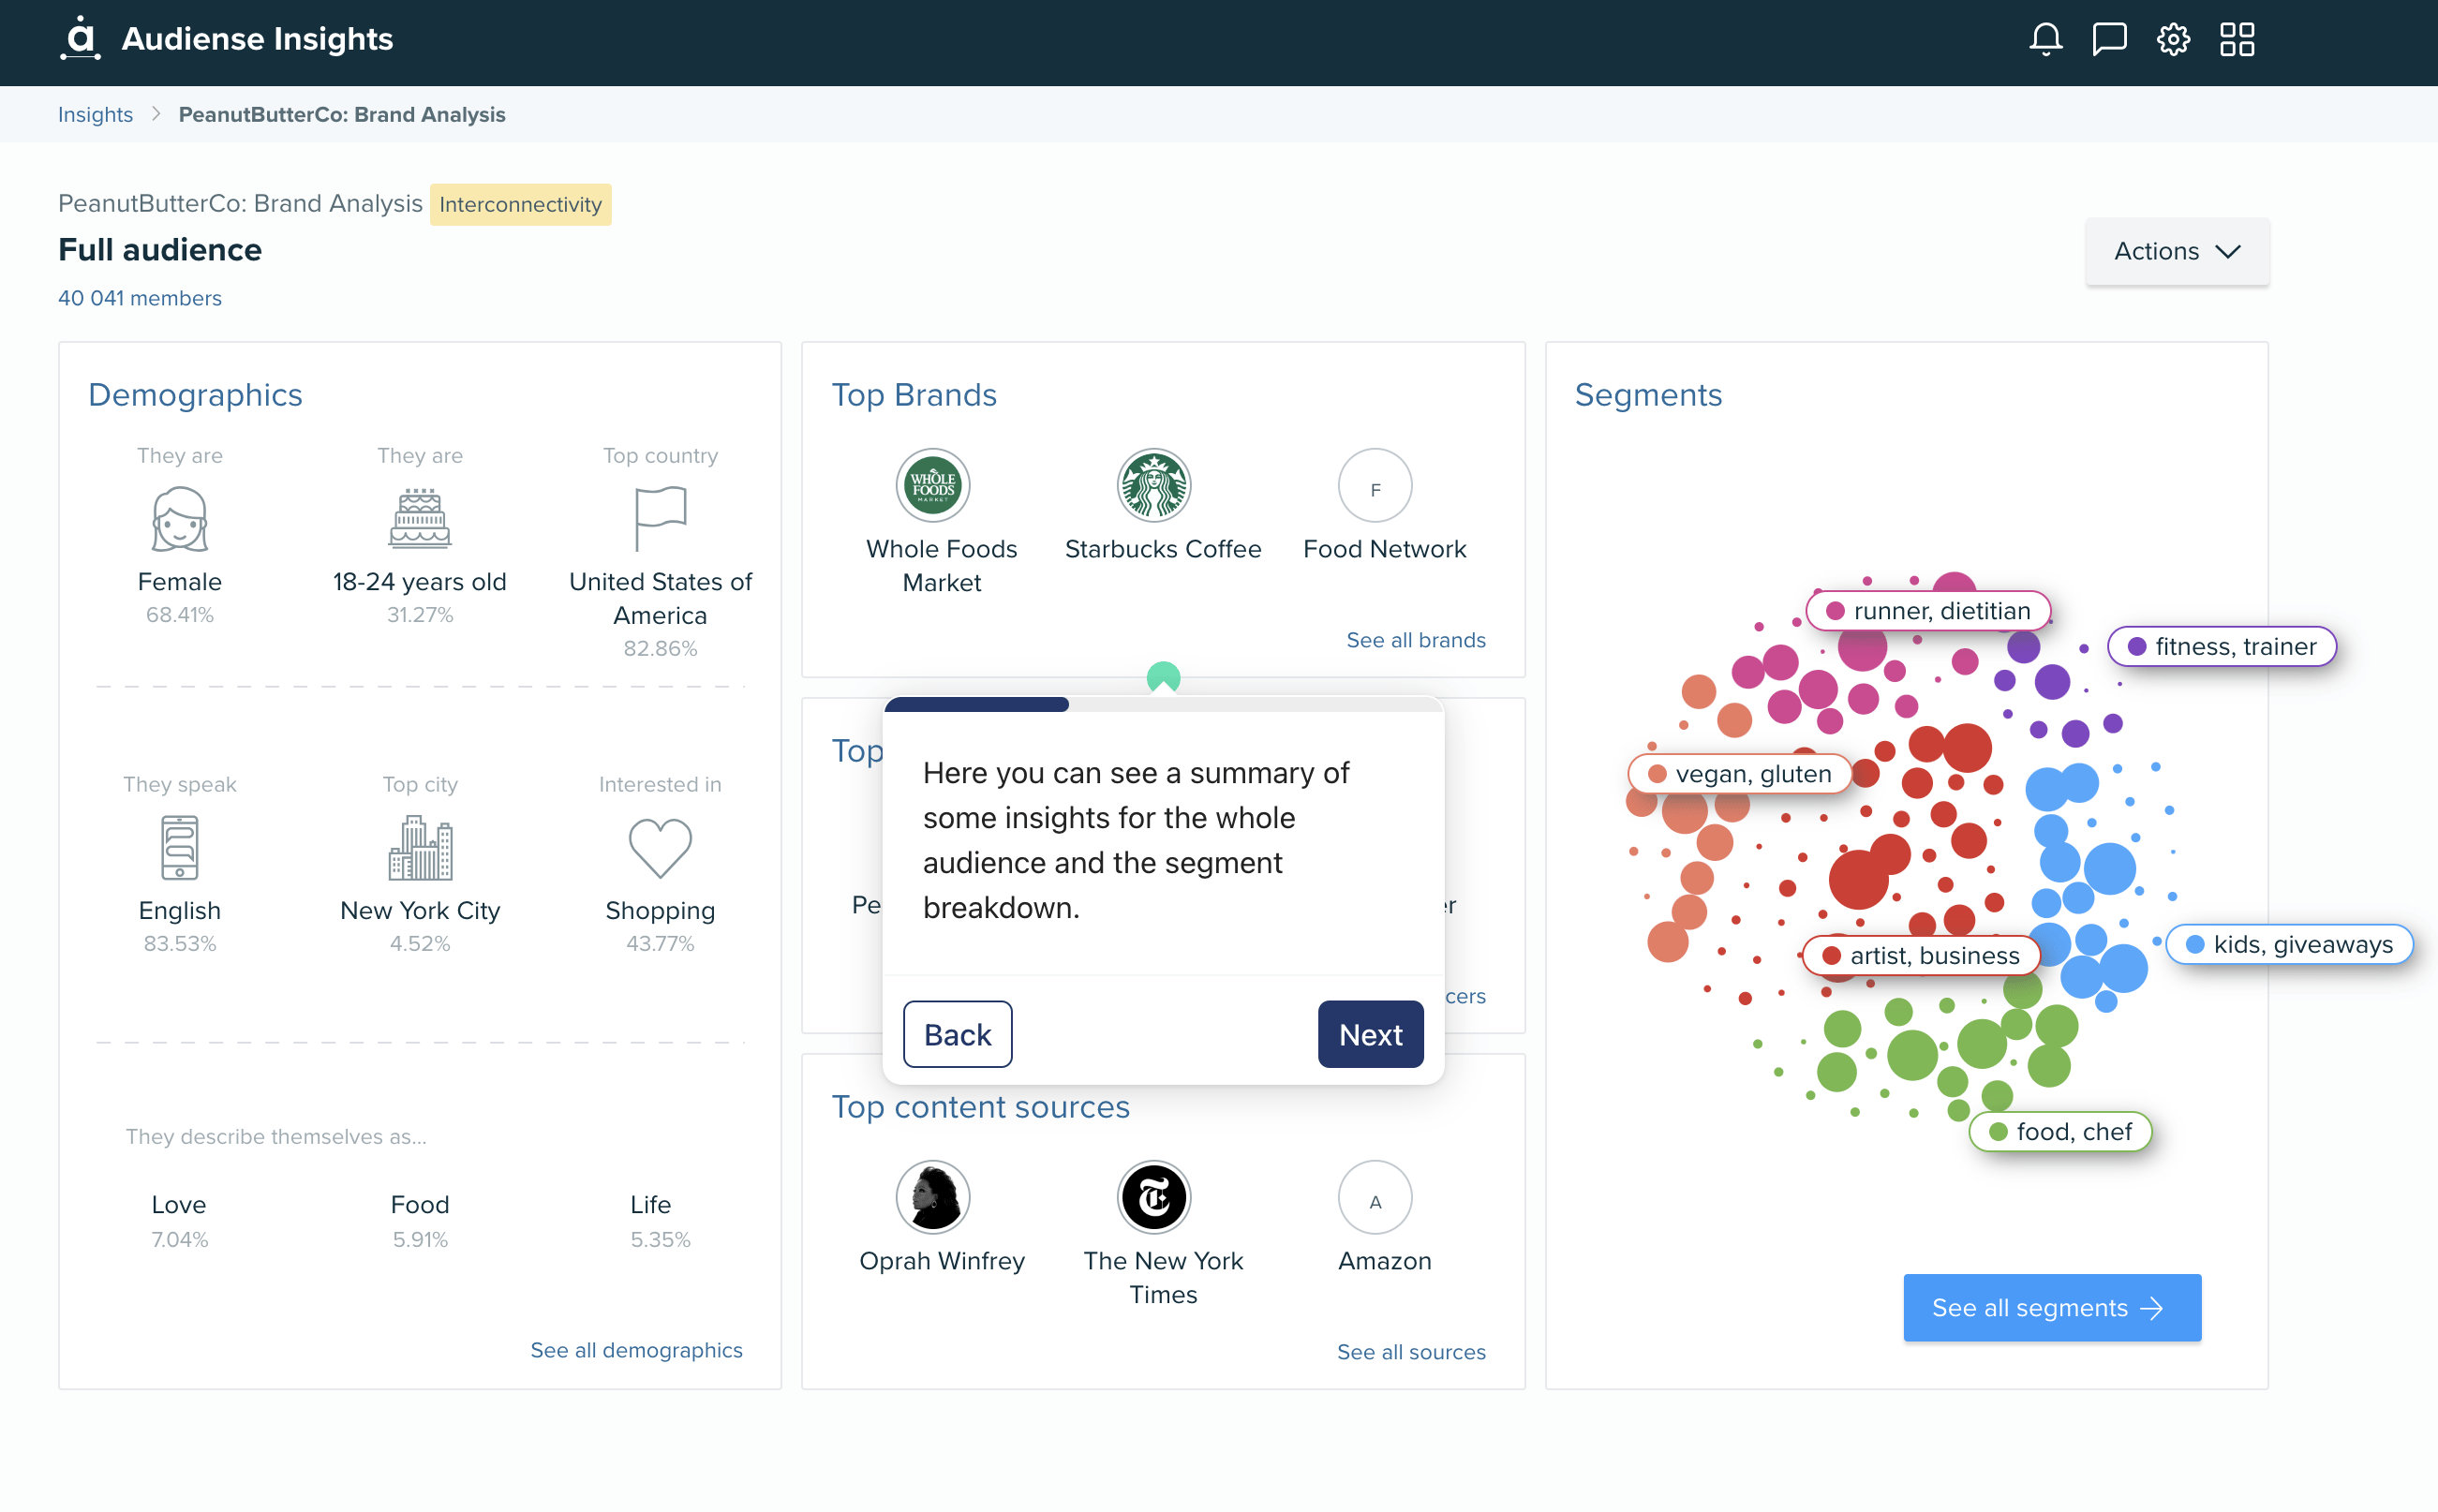 Alt “an interactive walkthrough of the an audience intelligence report in Audiense” (2)